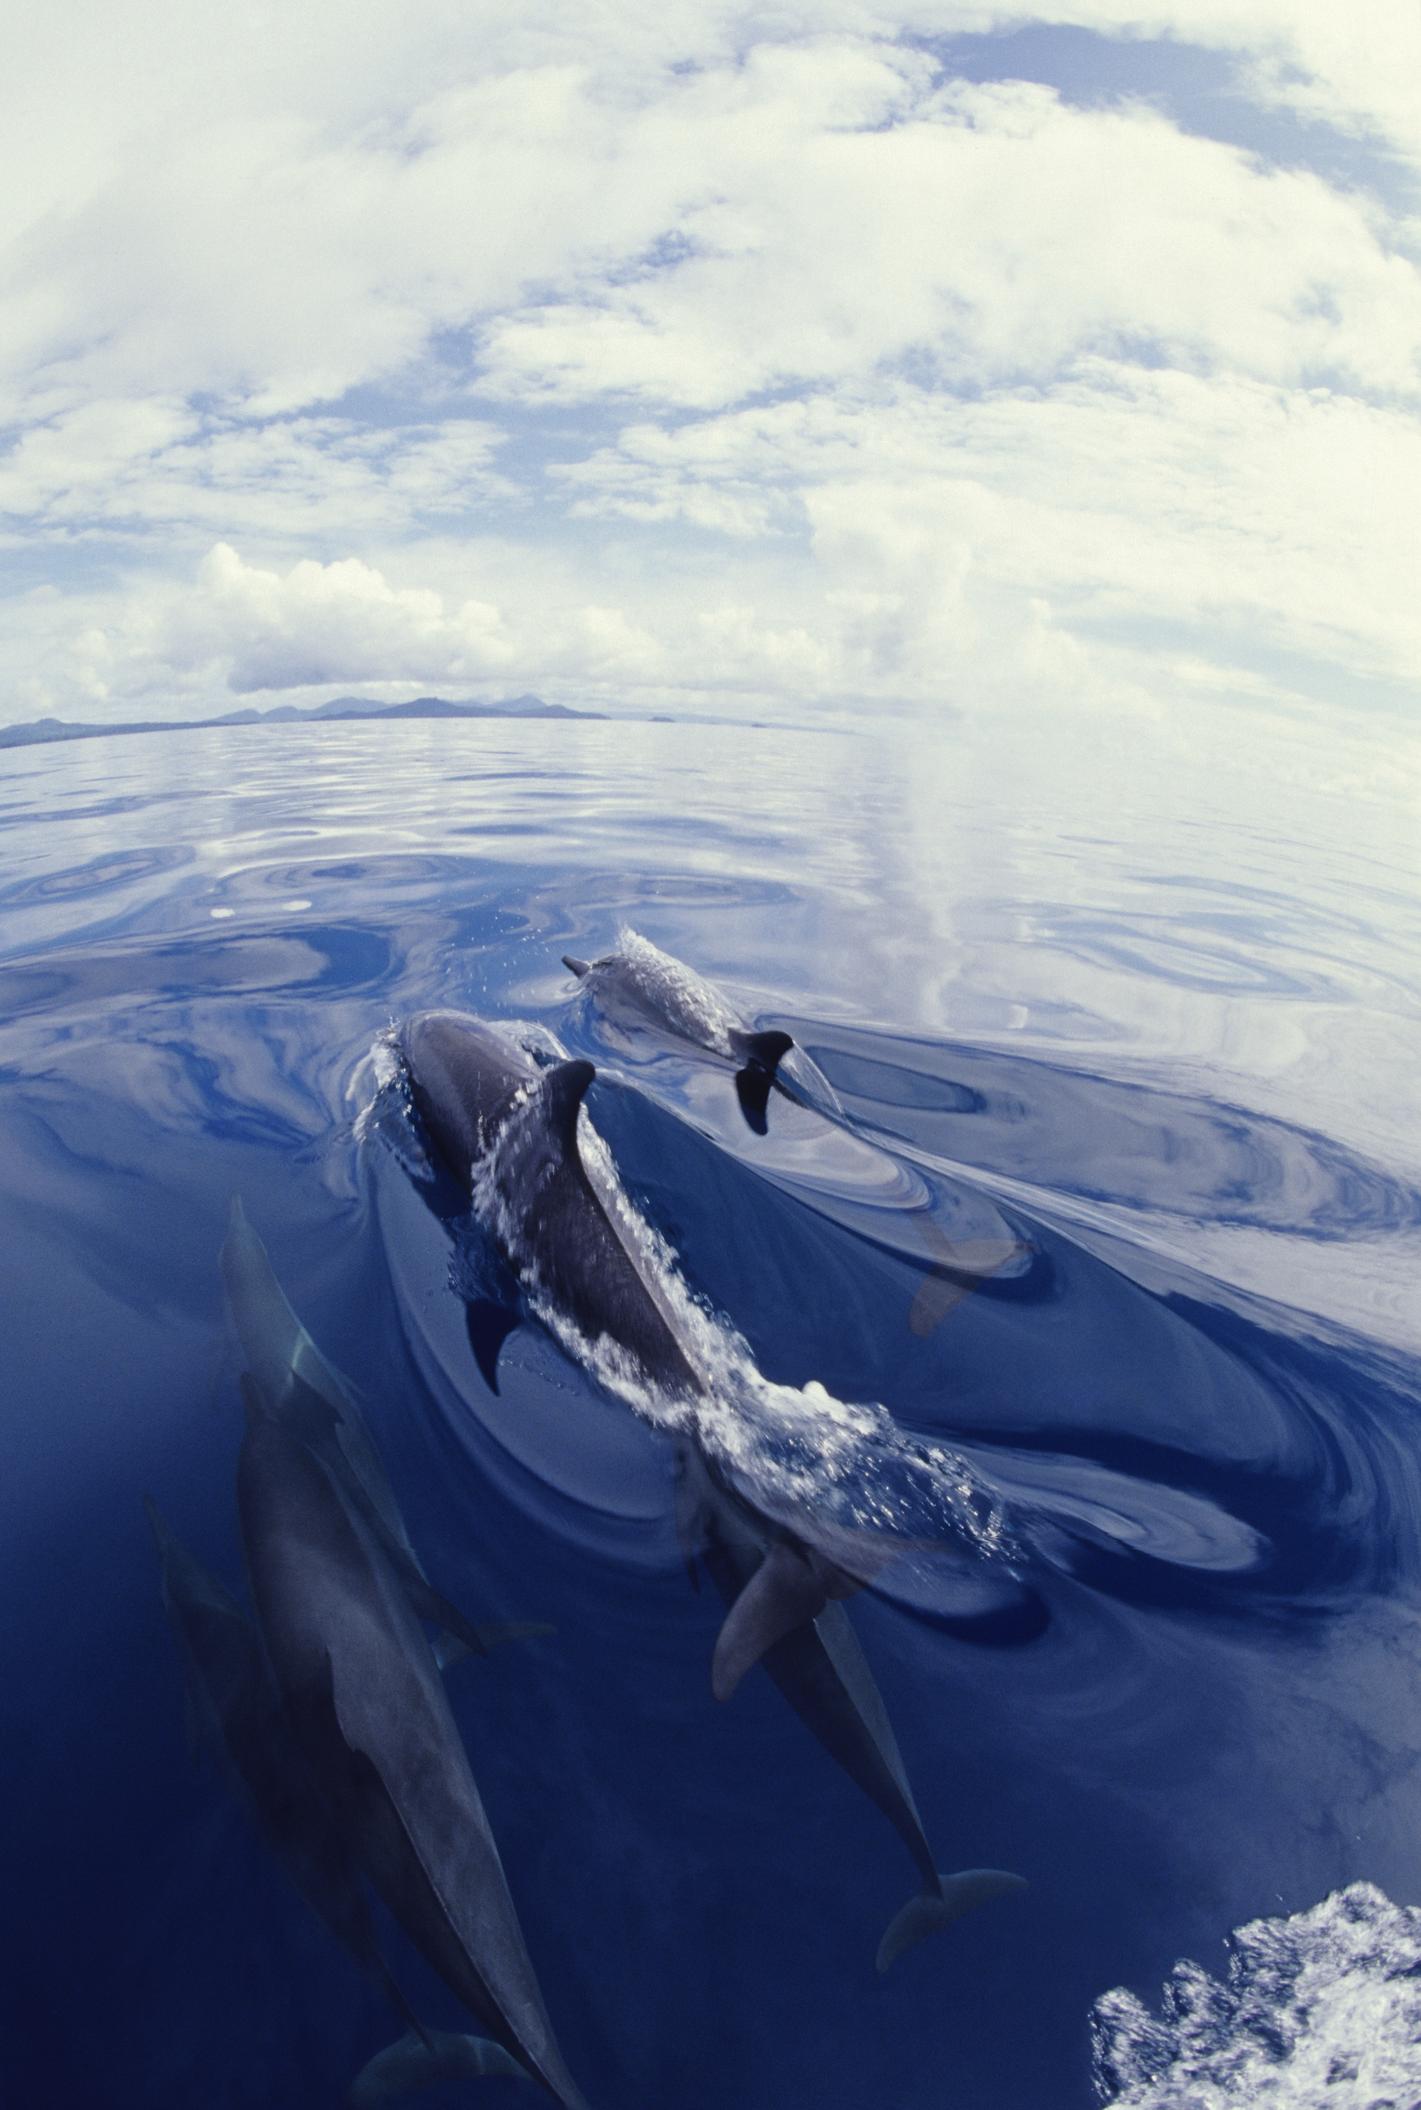 Dolphins jumping in water